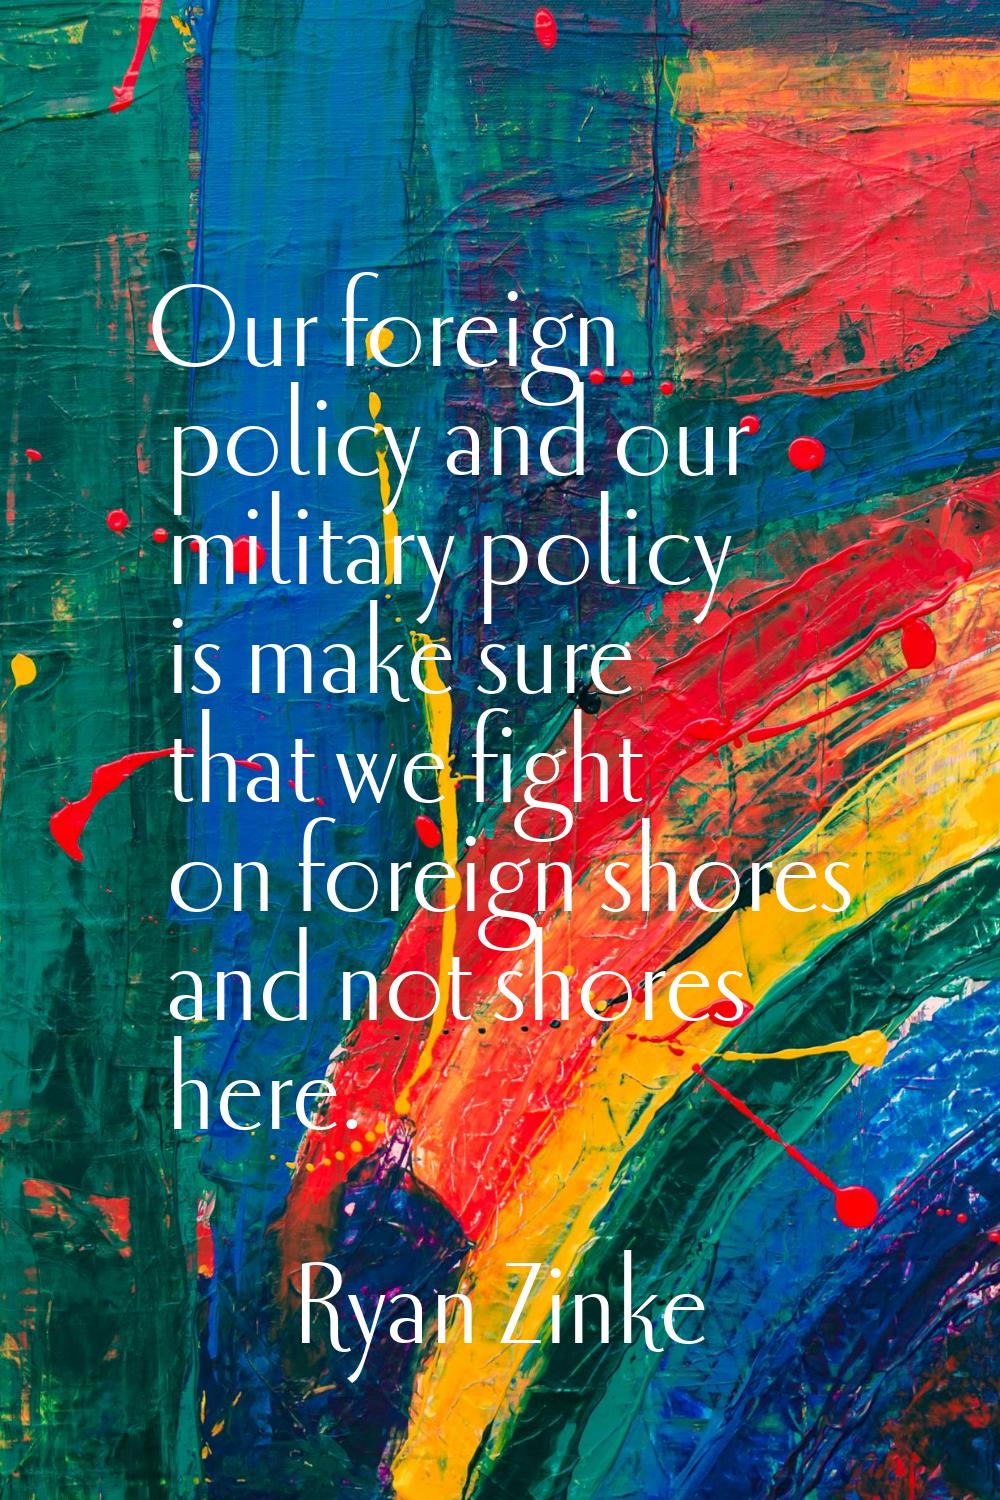 Our foreign policy and our military policy is make sure that we fight on foreign shores and not sho